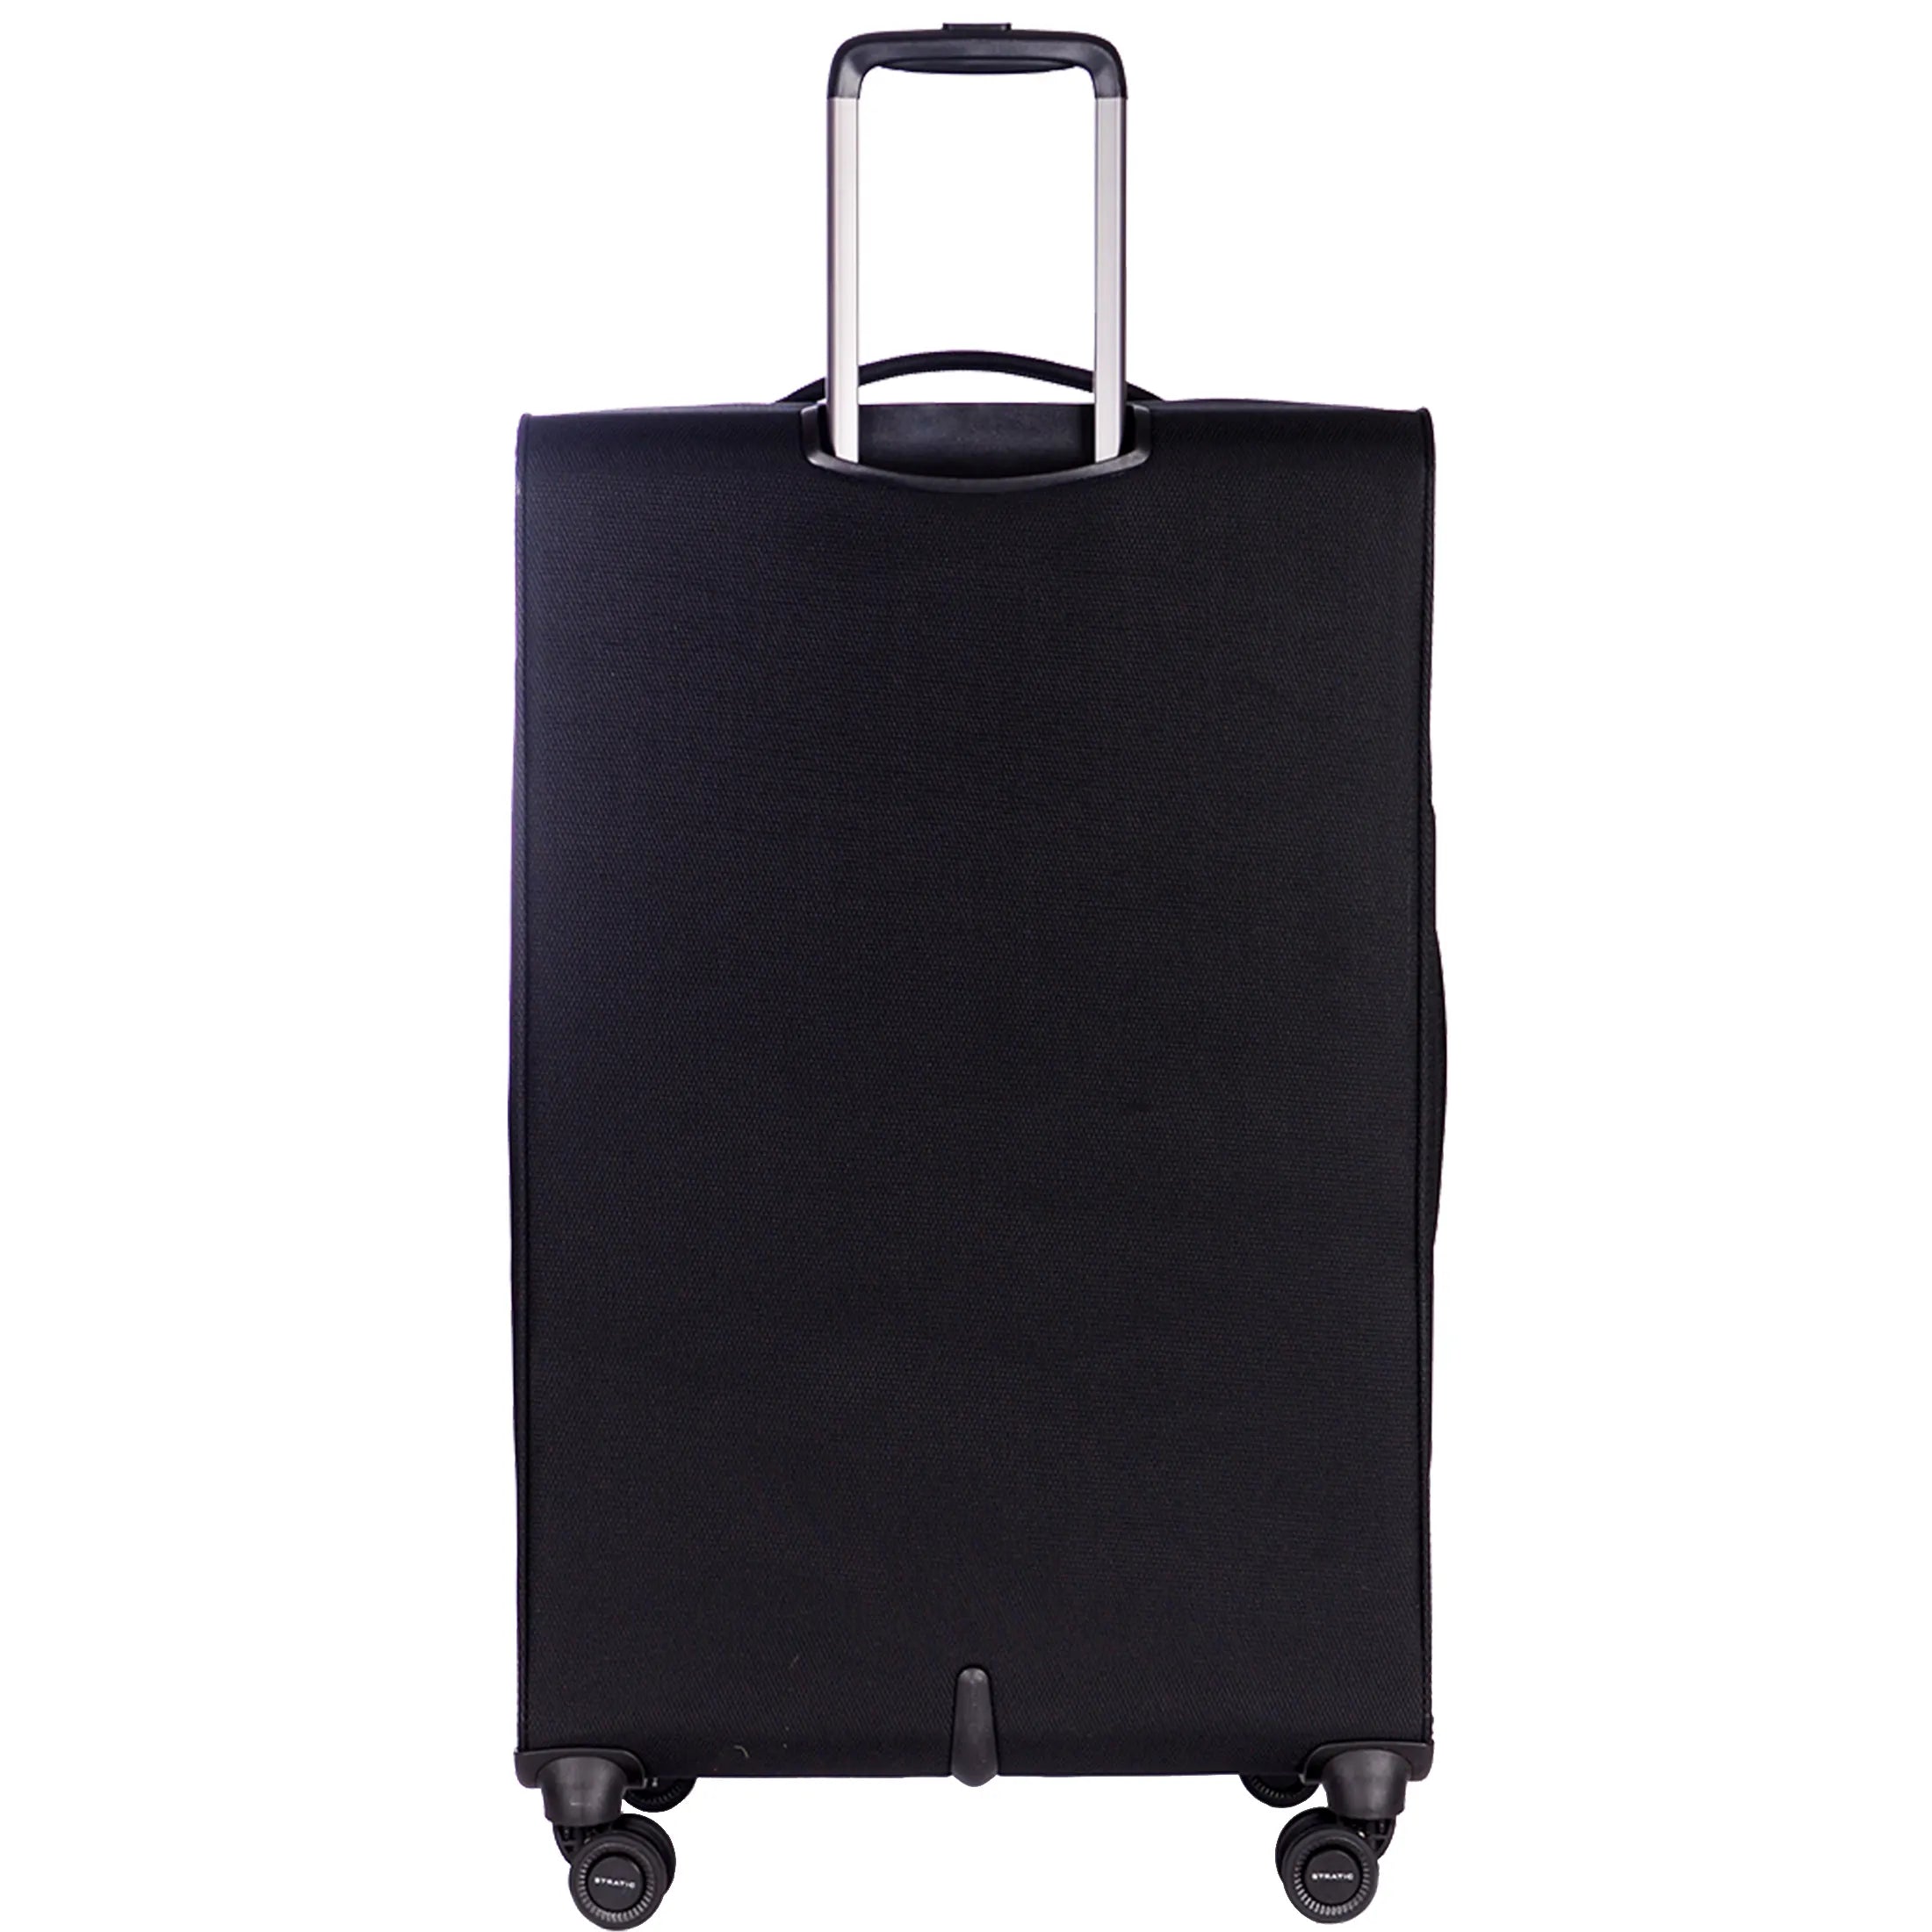 Stratic Light + trolley 4 roues 80 cm - Rouge